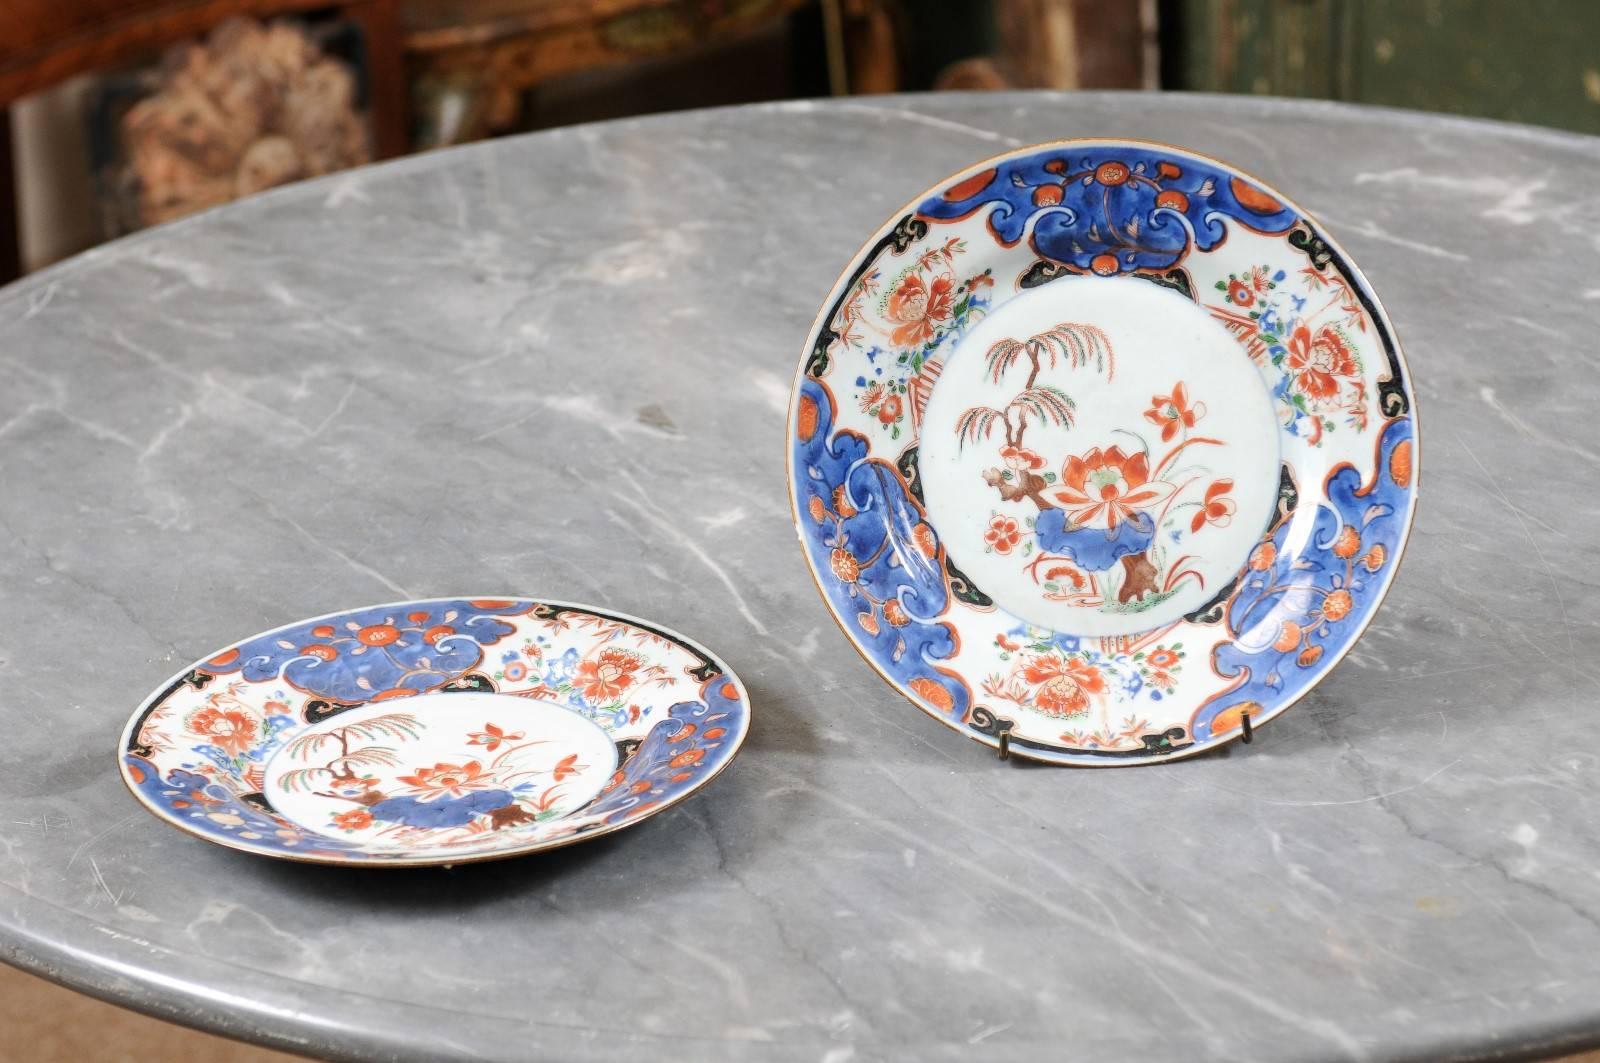 Pair of 18th Century Chinese Export Imari plates with blues, red, greens, & black.
 